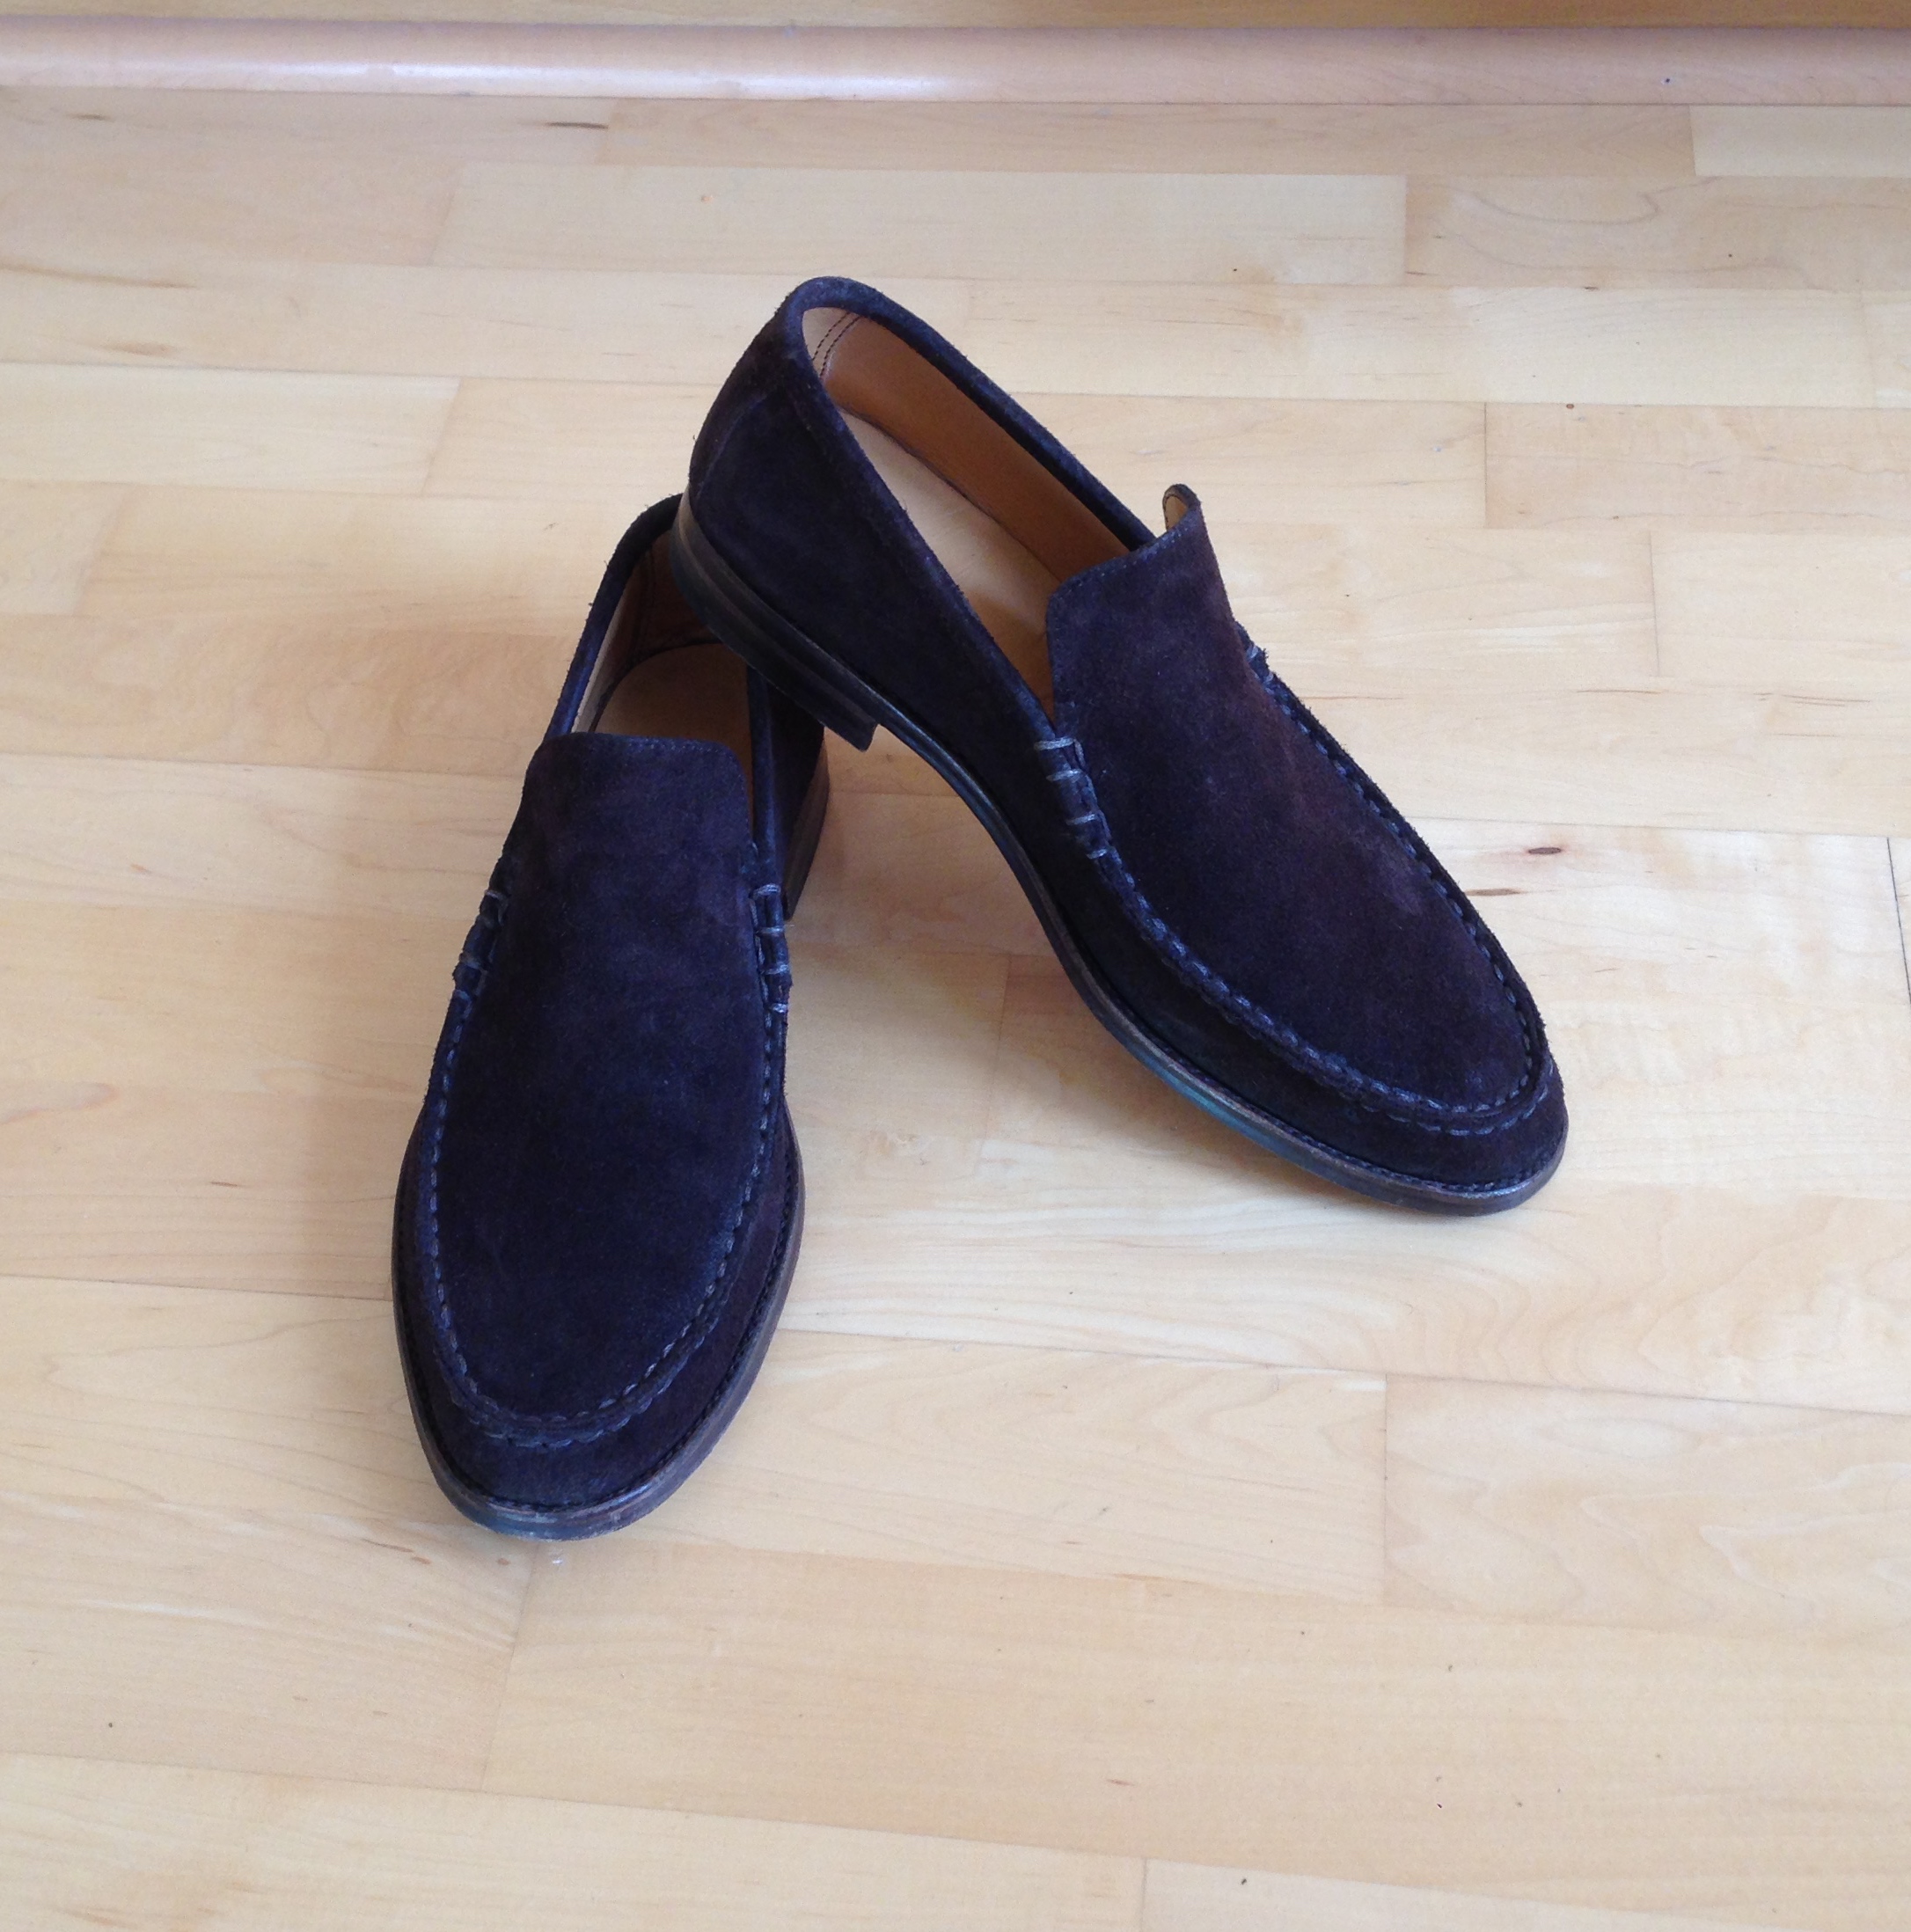 suede shoes - post 'em here! | Page 147 | Styleforum